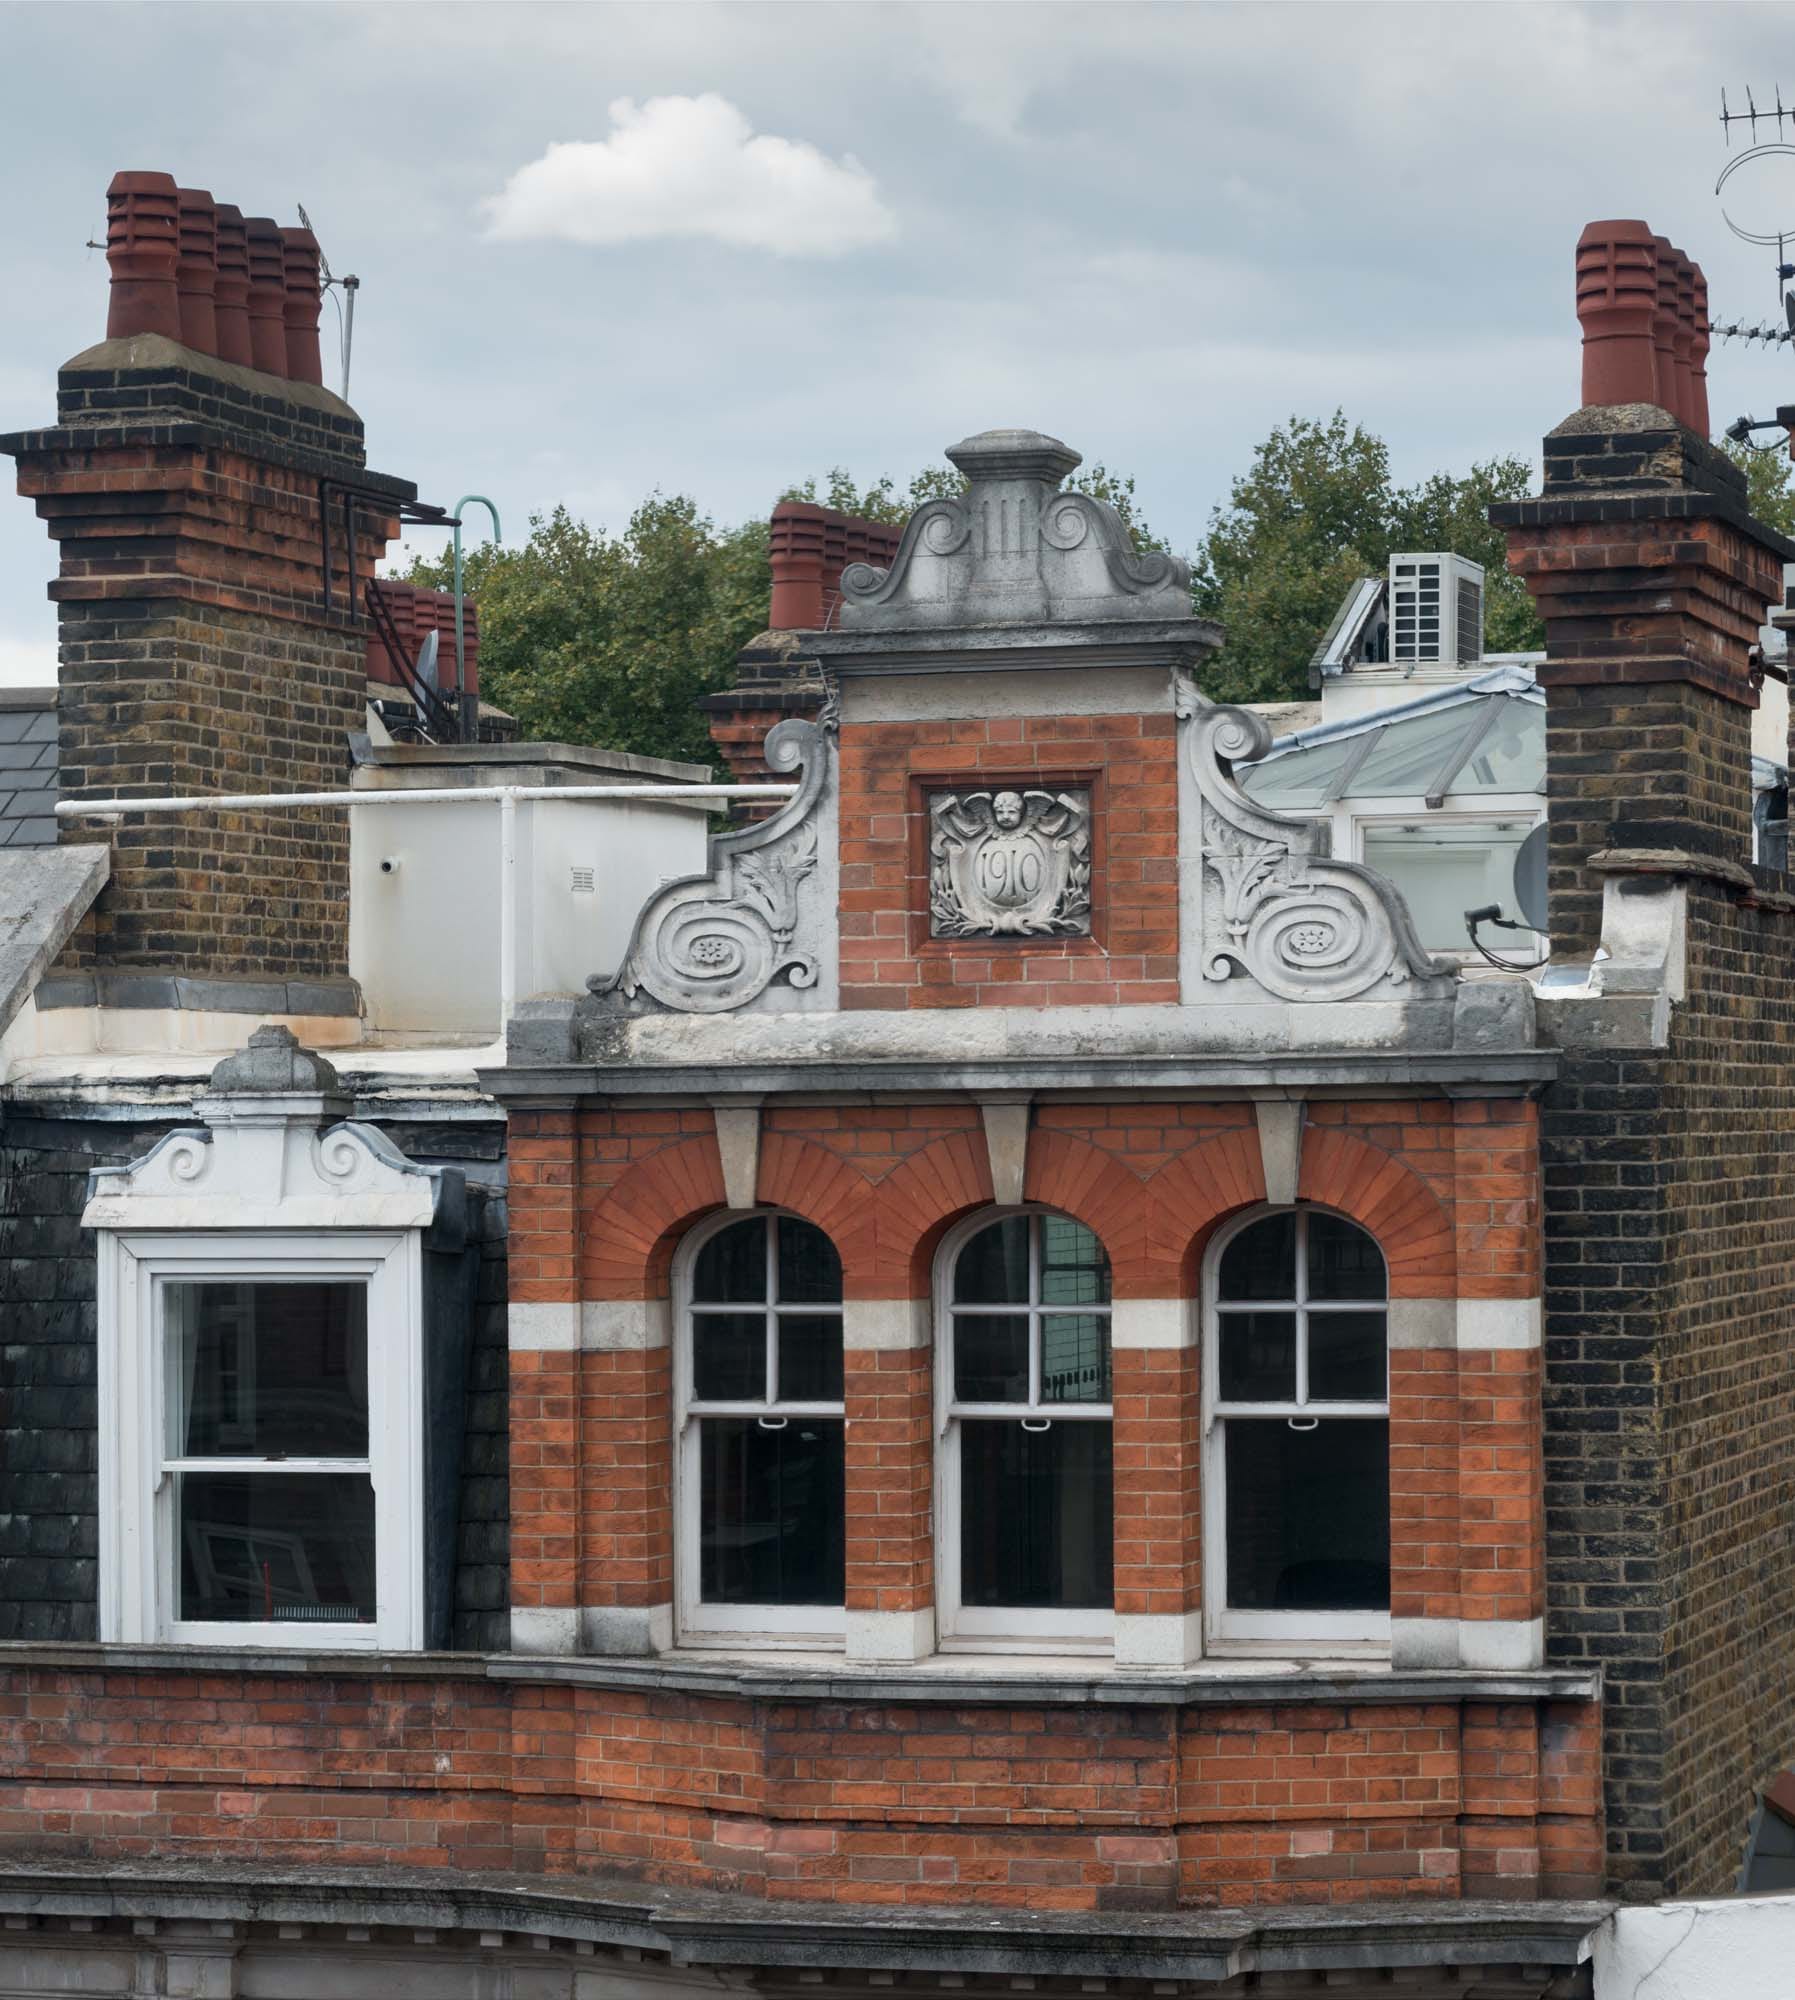 Detail of the gable of No. 83 Marylebone High Street photographed by Chris Redgrave